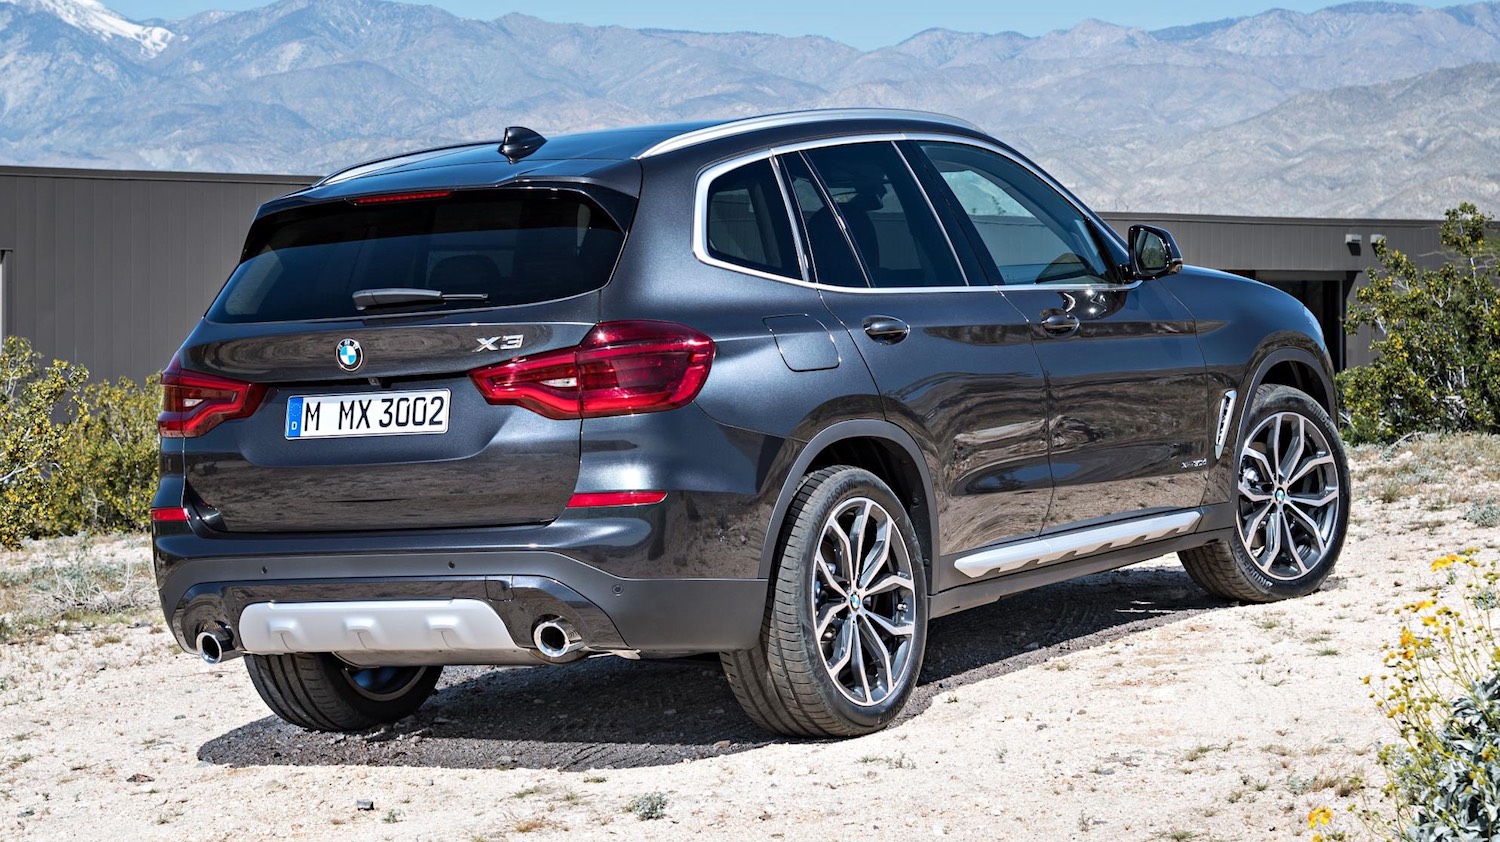 Neil Lyndon takes a spin in the latest BMW X3 M-Sport 6